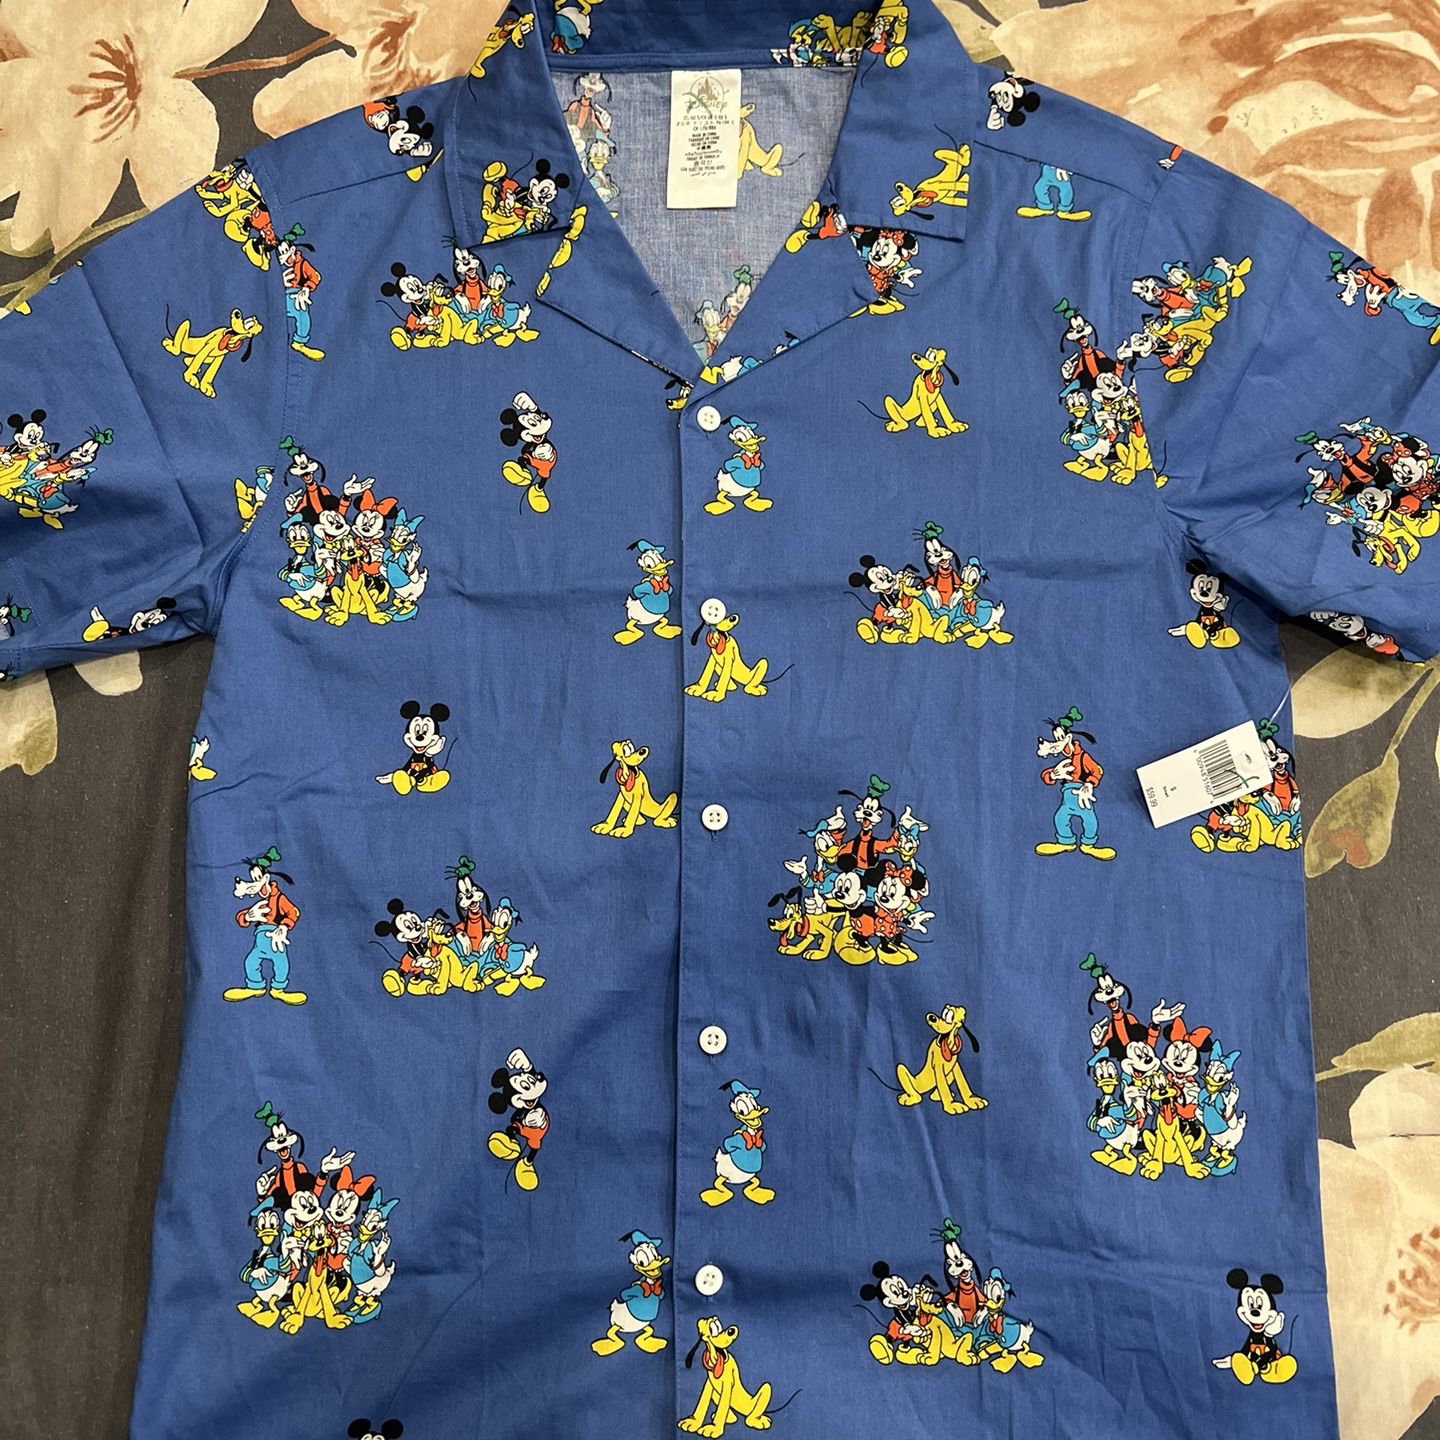 Disney Mickey and Friends button down shirt.